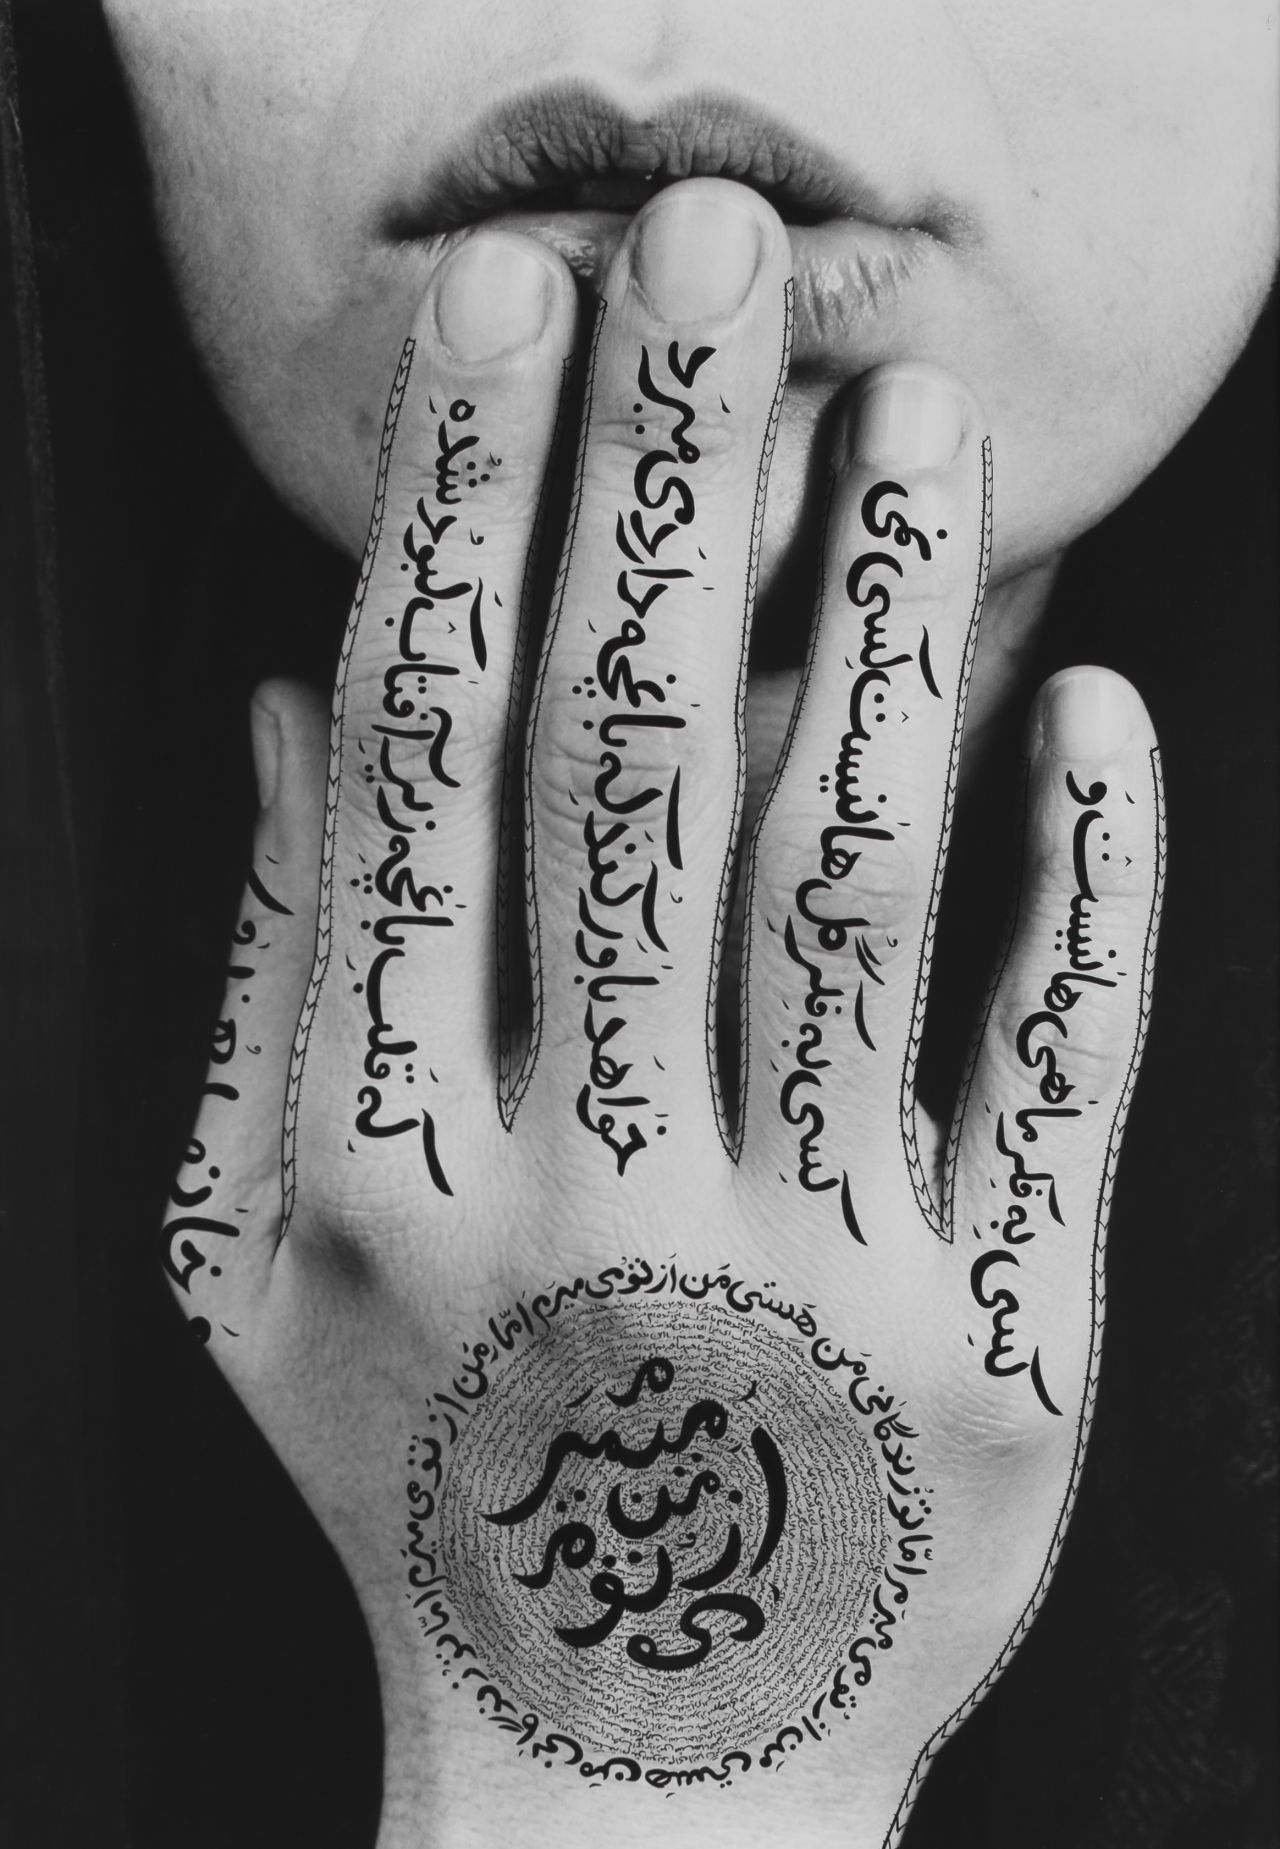 In "Women of Allah," Neshat included poems by Iranian poets Tahereh Saffarzadeh and Forough Farokhzad.